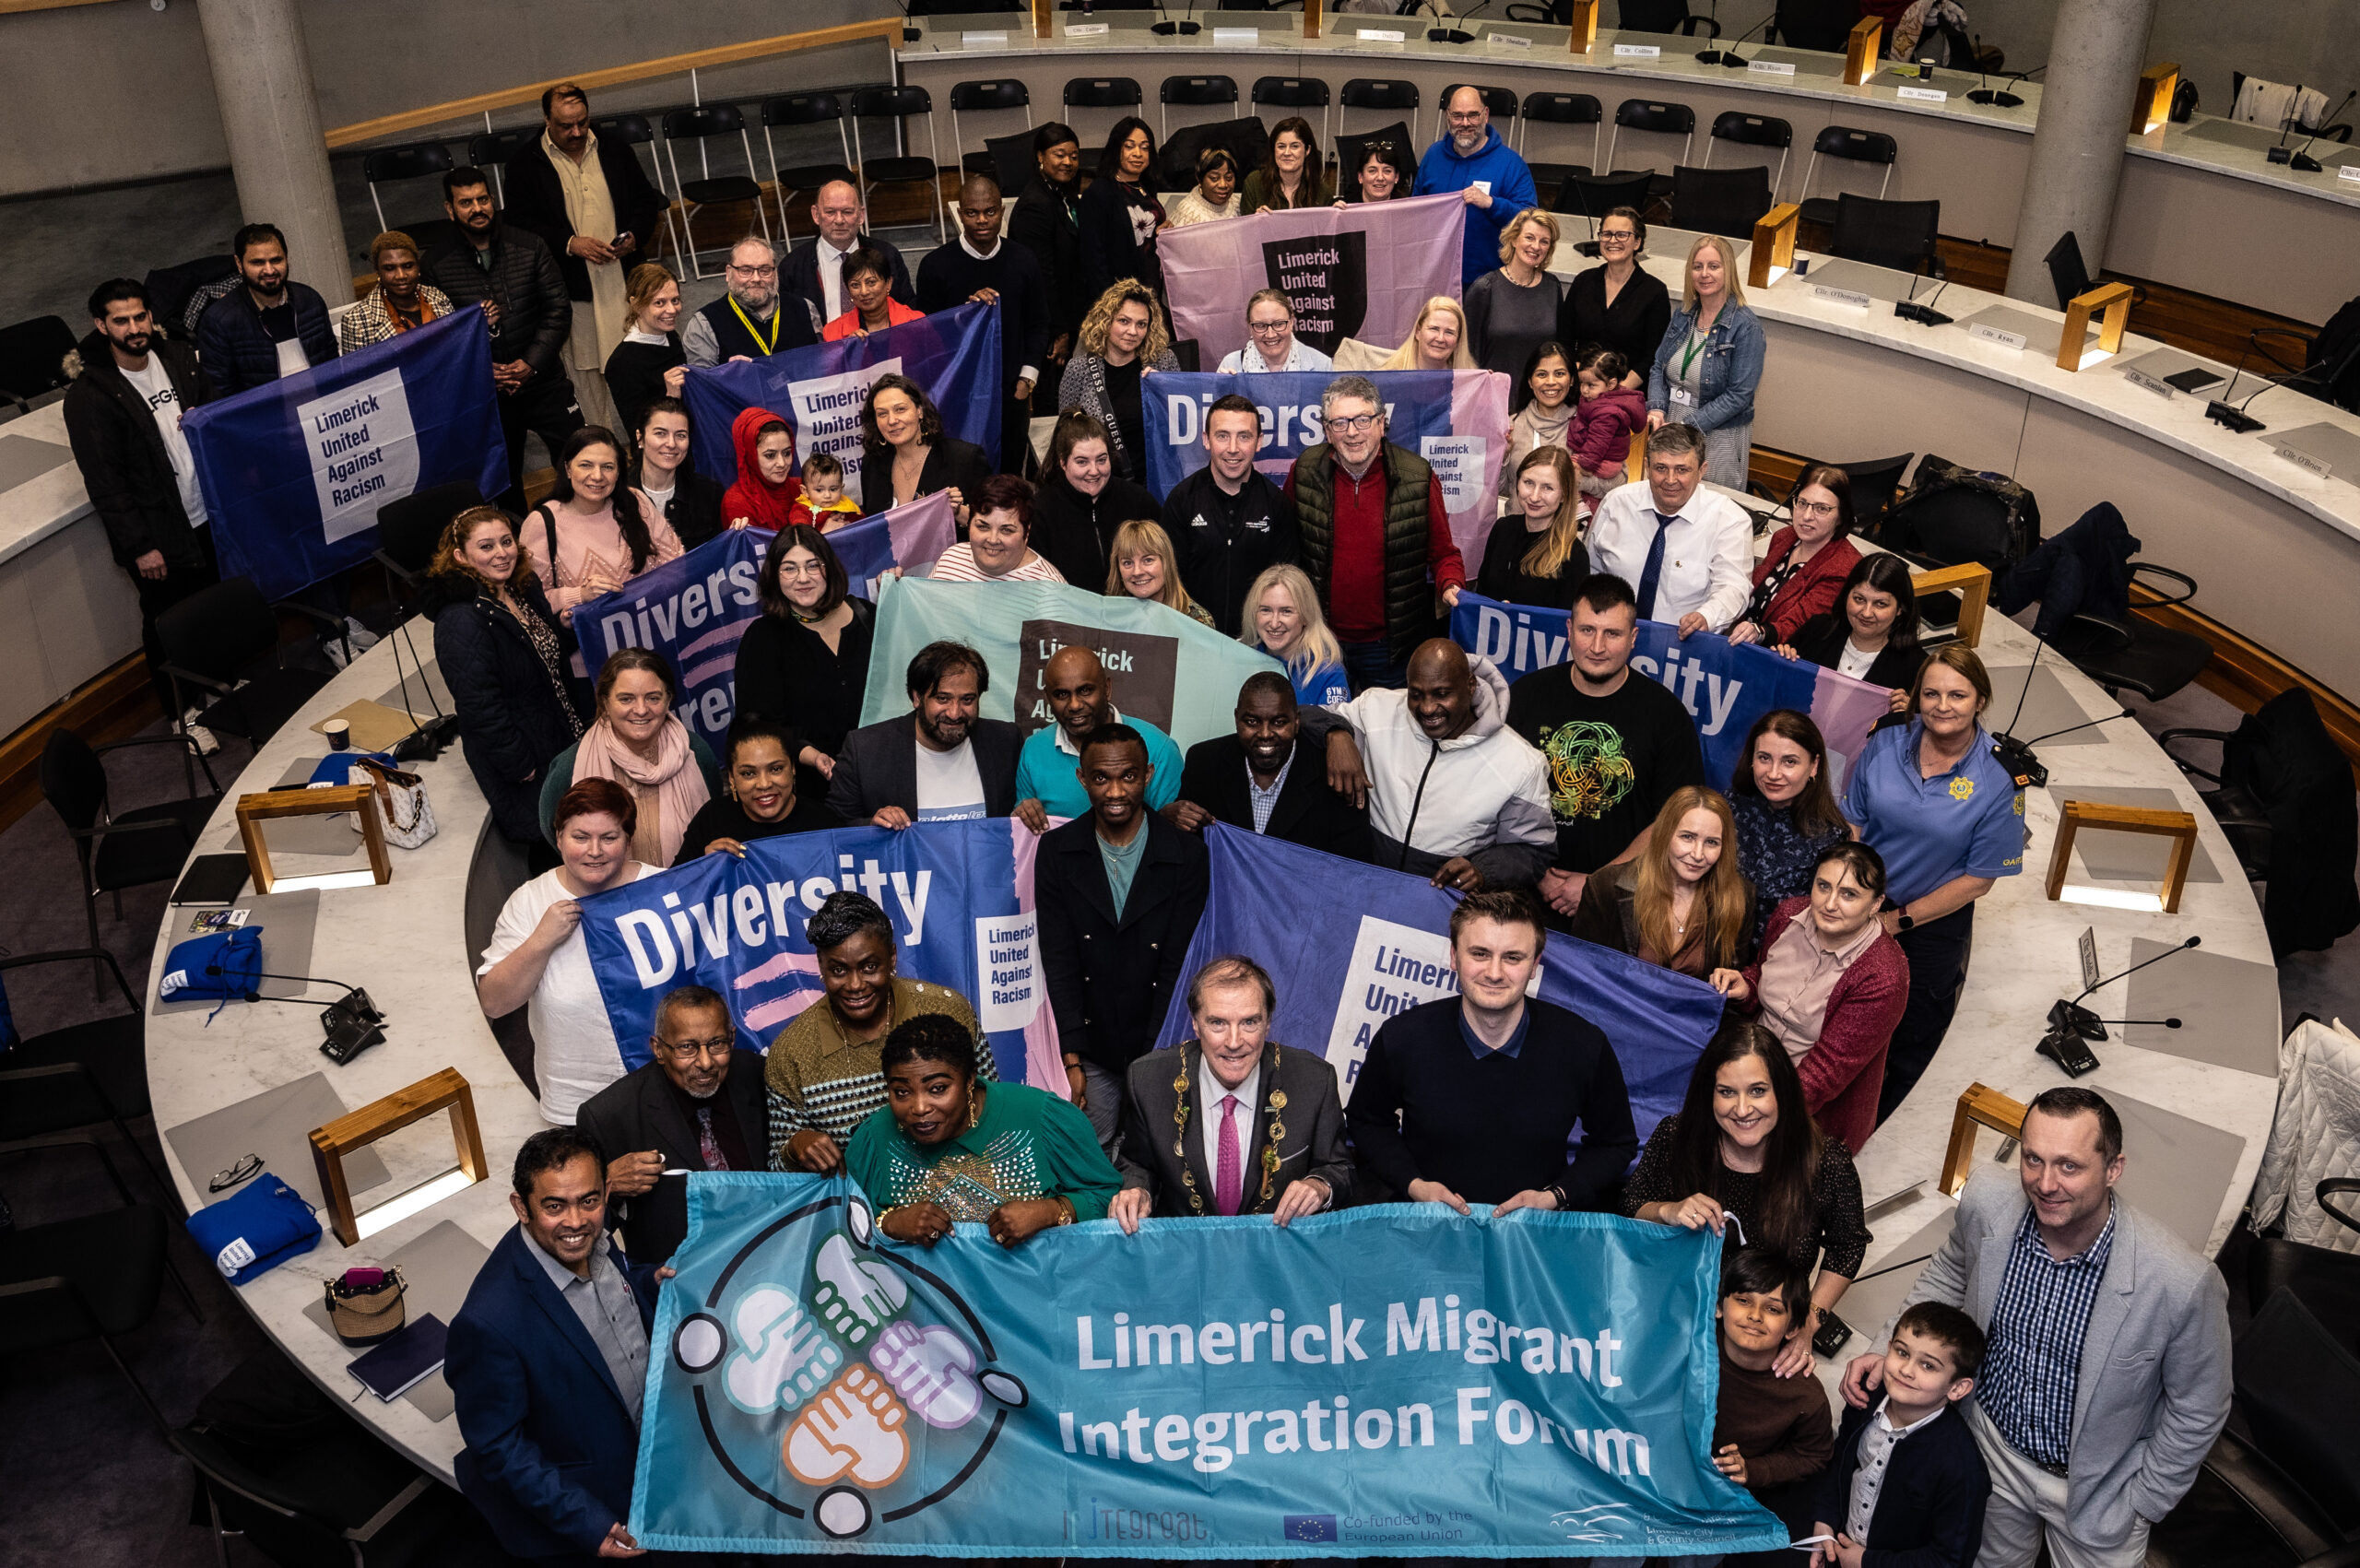 Launch of Limerick Migrant Integration Forum on International Anti-Racism Day